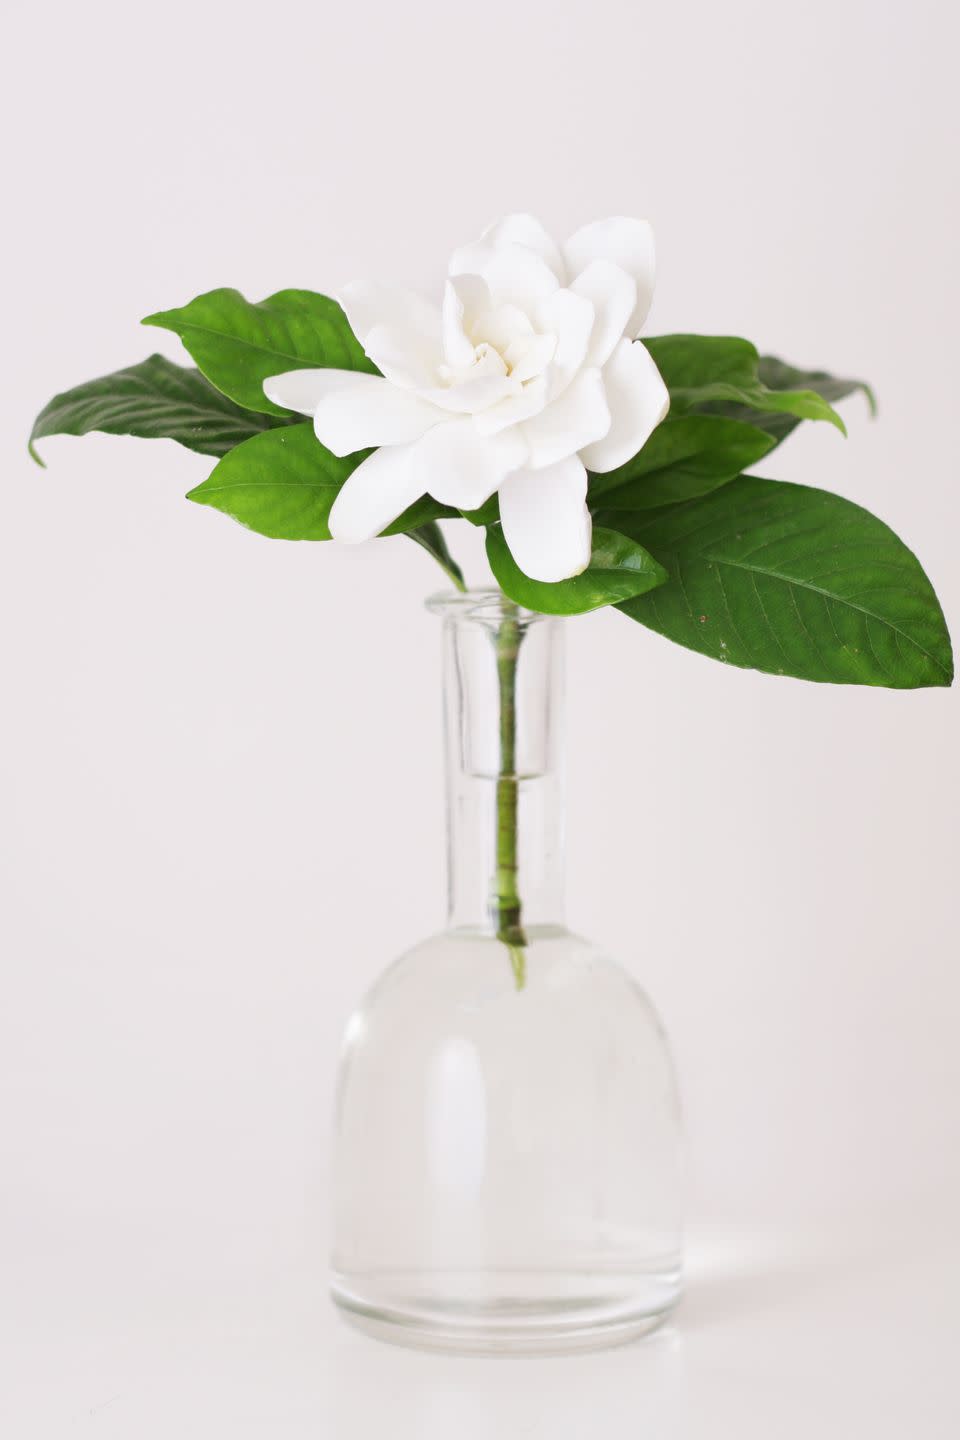 gardenia flower on a glass vase with white background